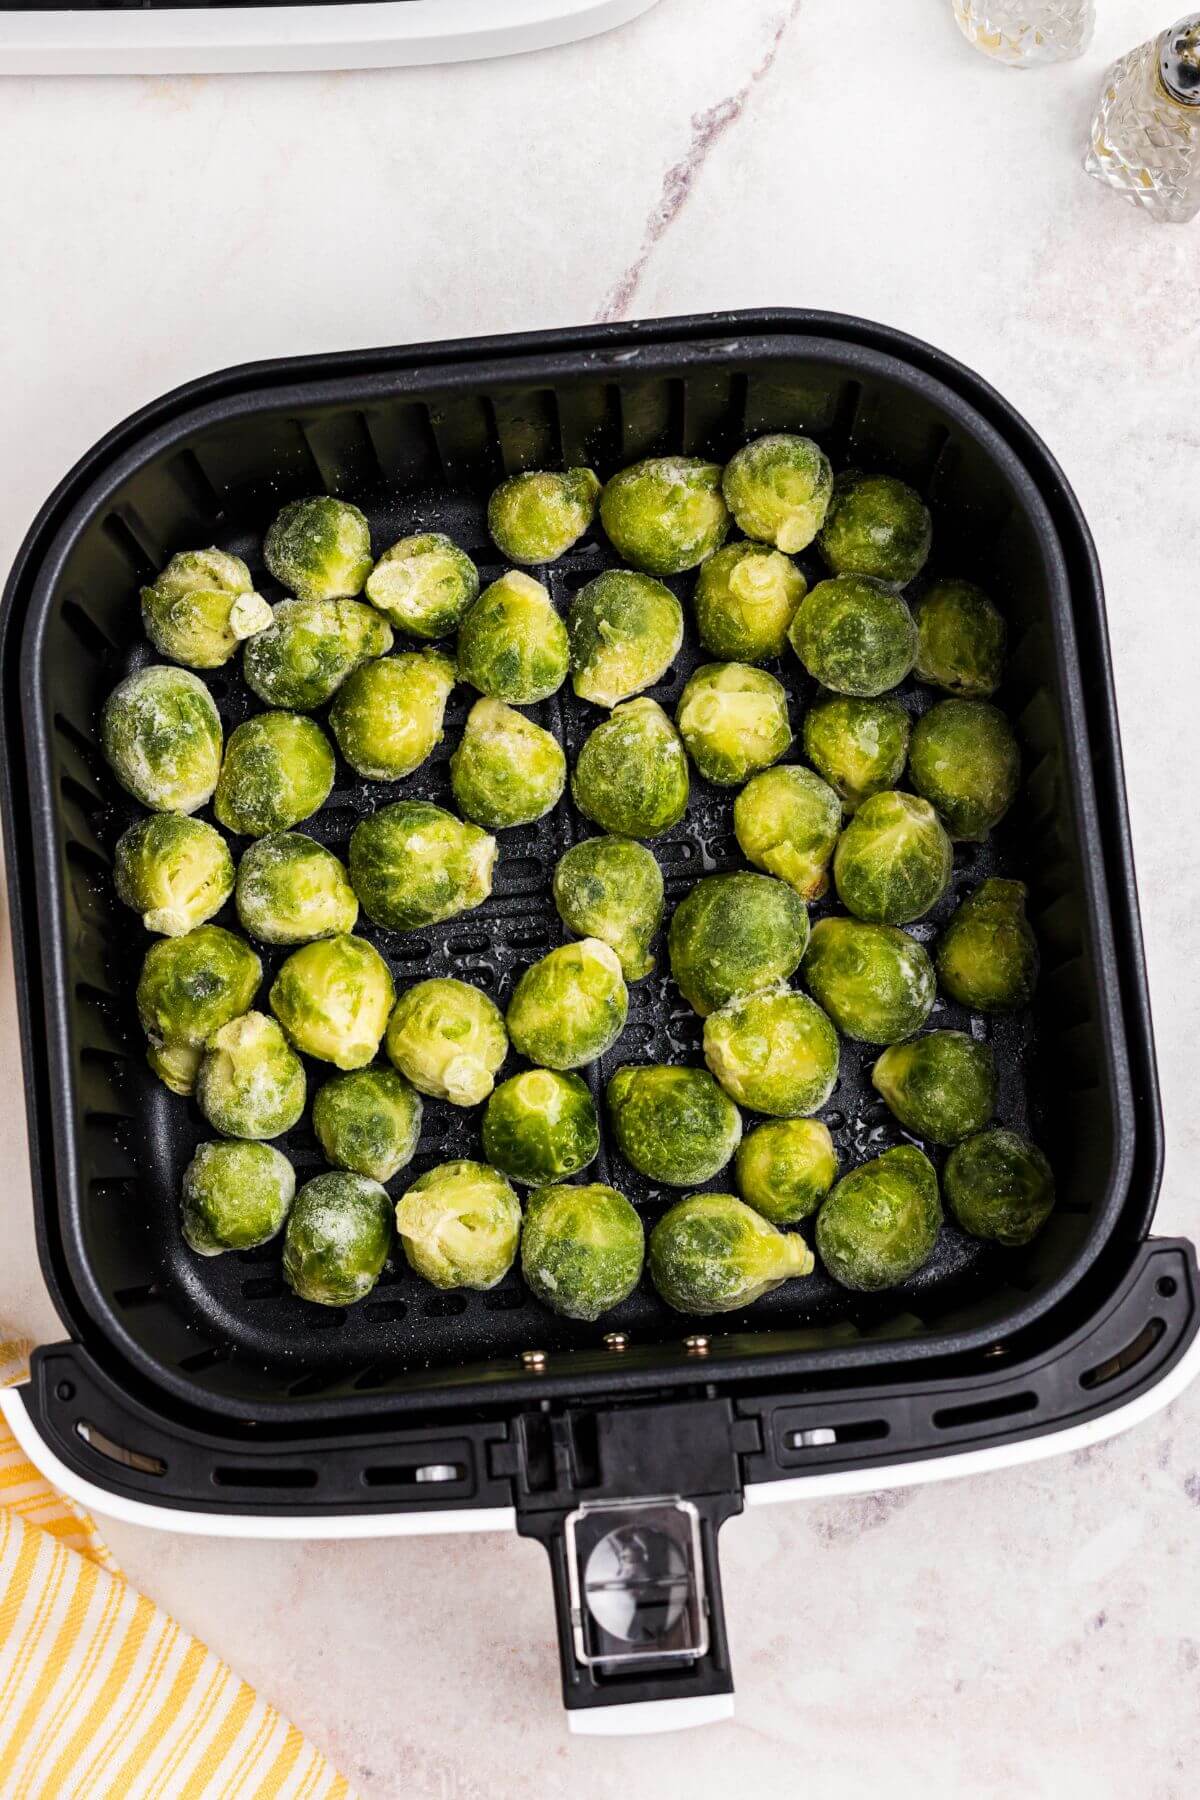 Frozen brussels sprouts in the air fryer basket before being cooked. 